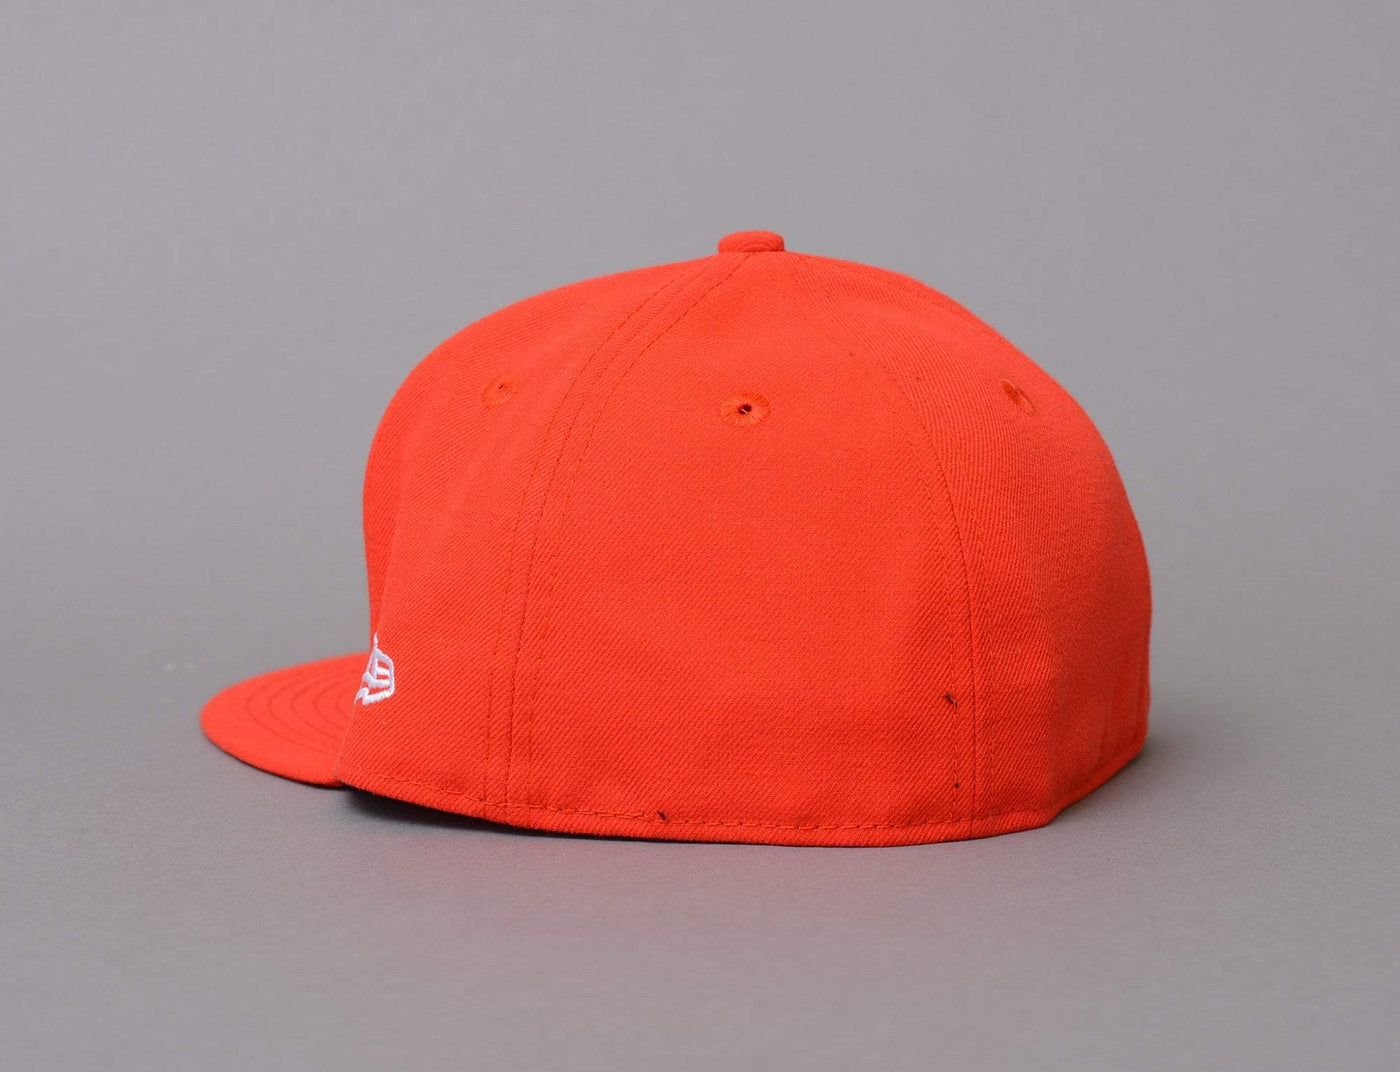 Cap Fitted 59fifty NE Flag Scarlet New Era